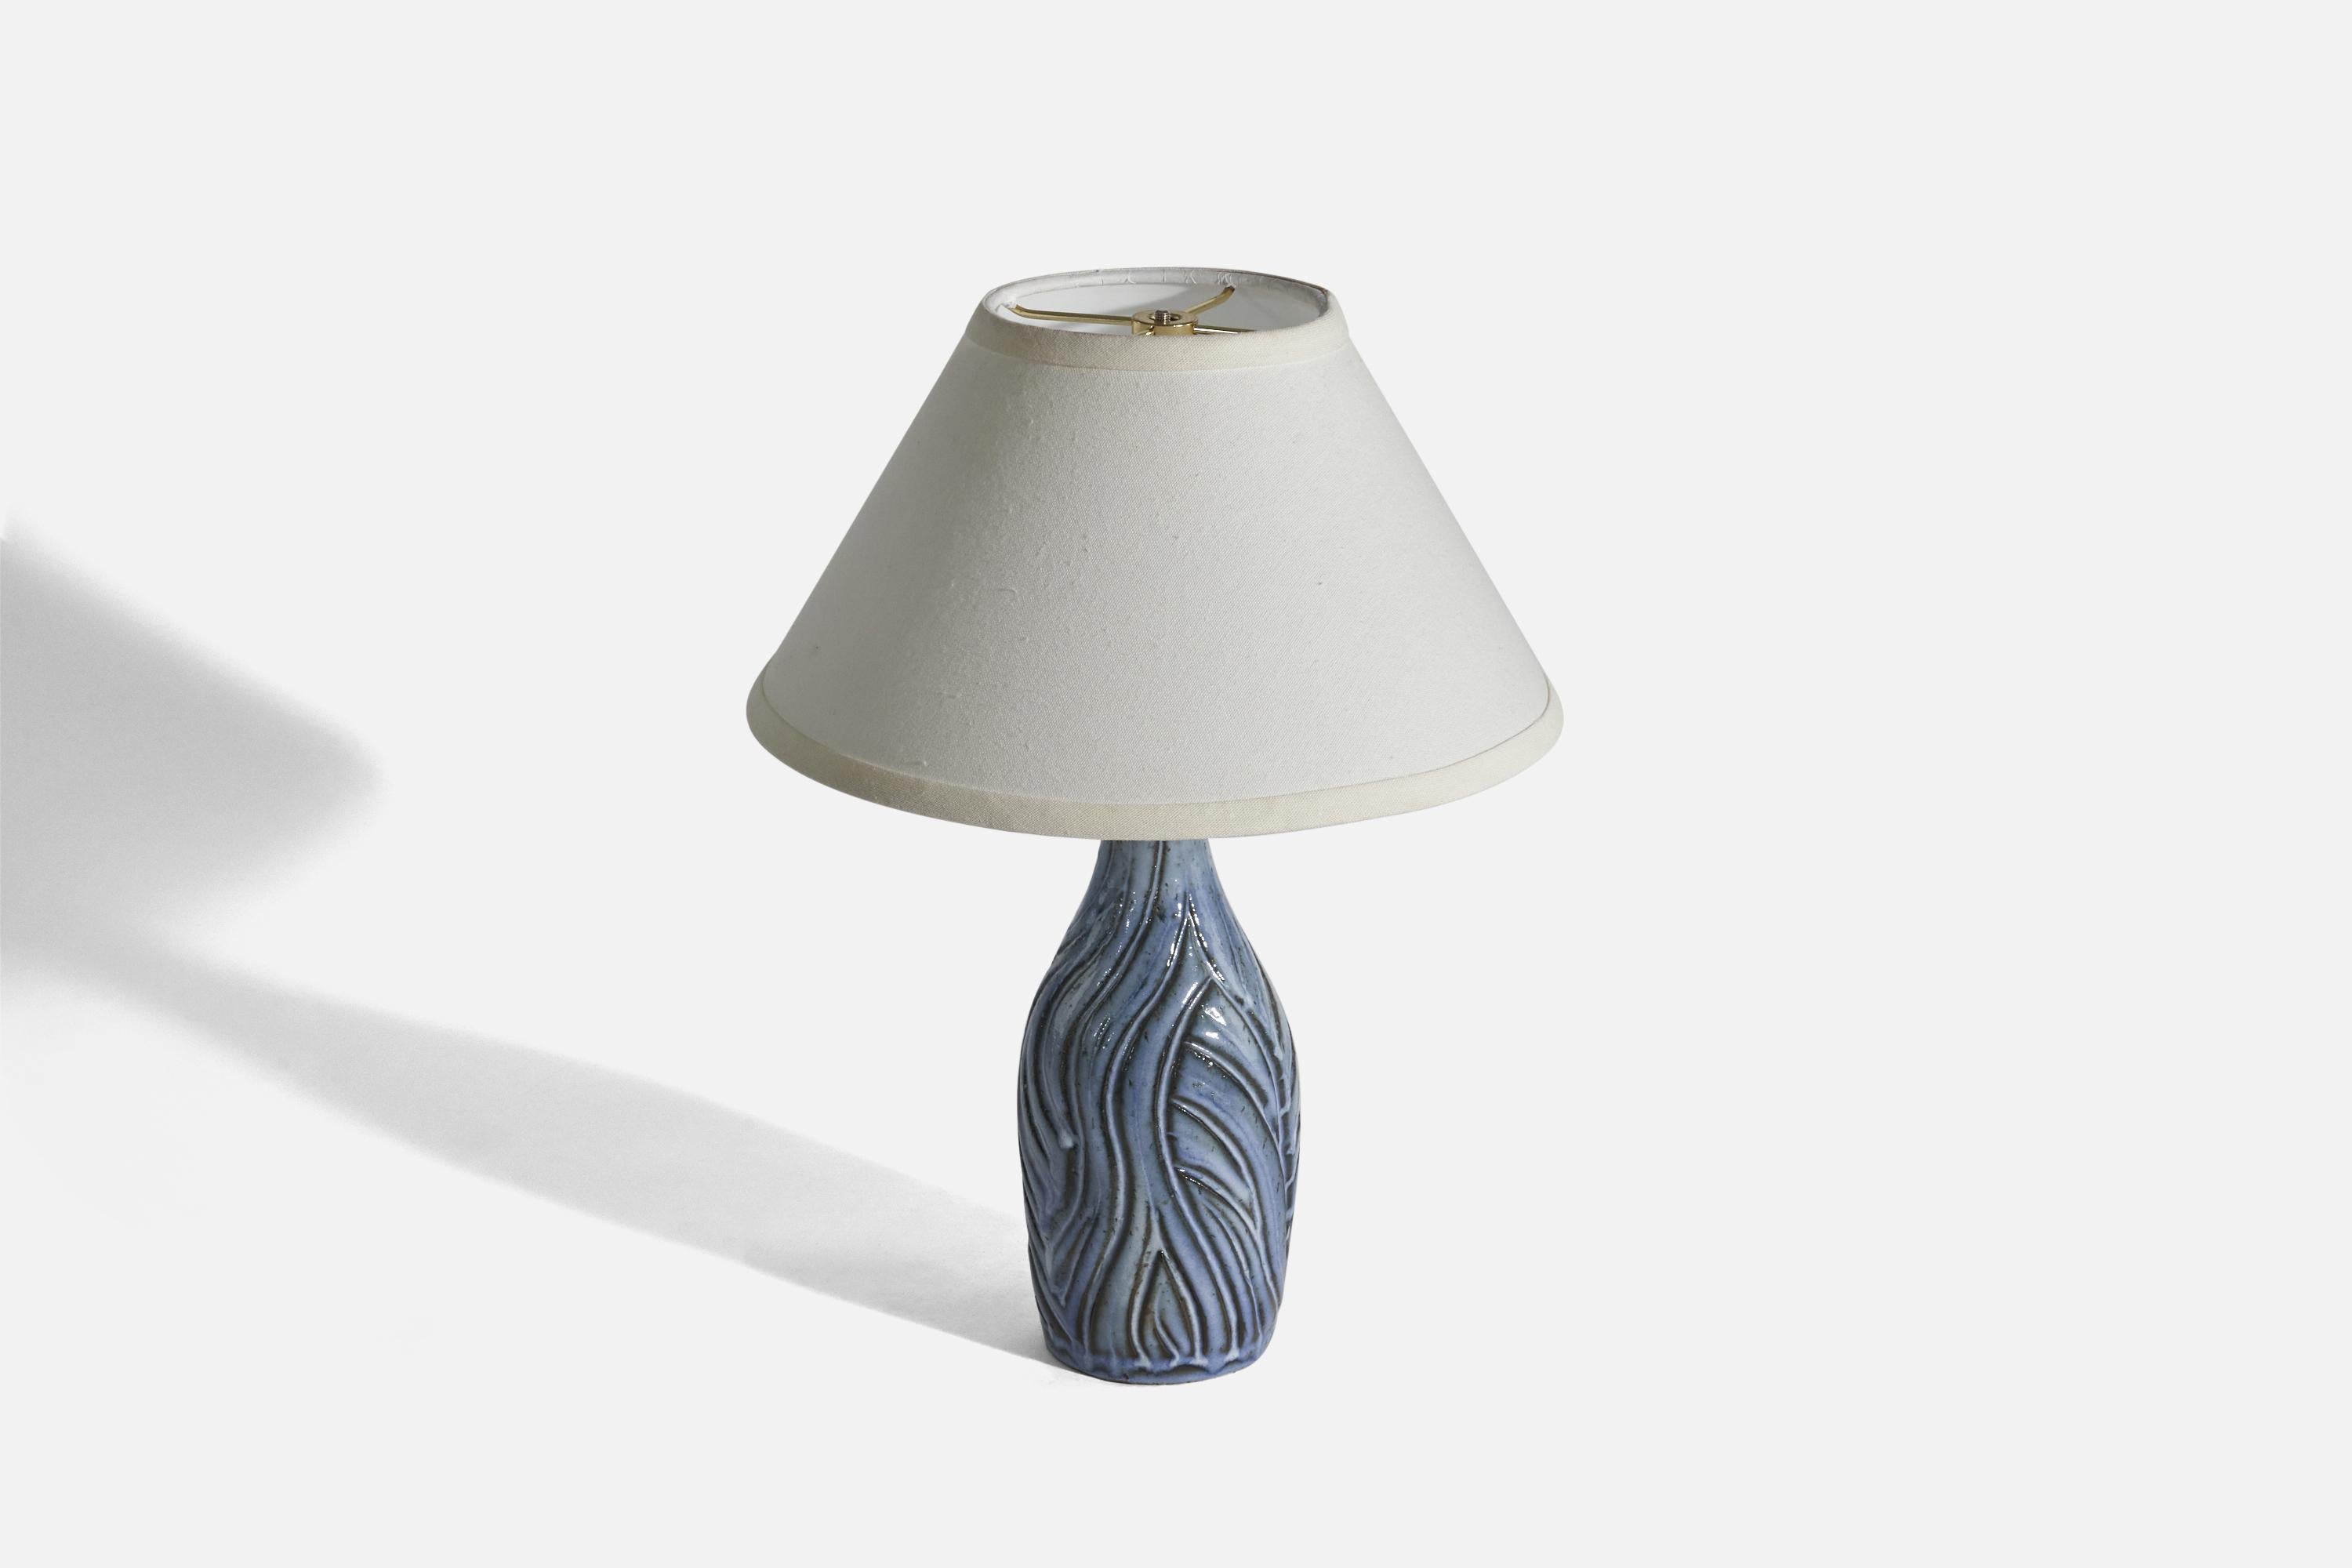 A blue-glazed stoneware table lamp designed and produced by Lauritz Hjorth, Denmark, 1940s. 

Sold without Lampshade(s).
Dimensions of Lamp (inches) : 13.93 x 4.5 x 4.5 (Height x Width x Depth)
Dimensions of Shade (inches) : 5.25 x 12.25 x 7.12 (Top